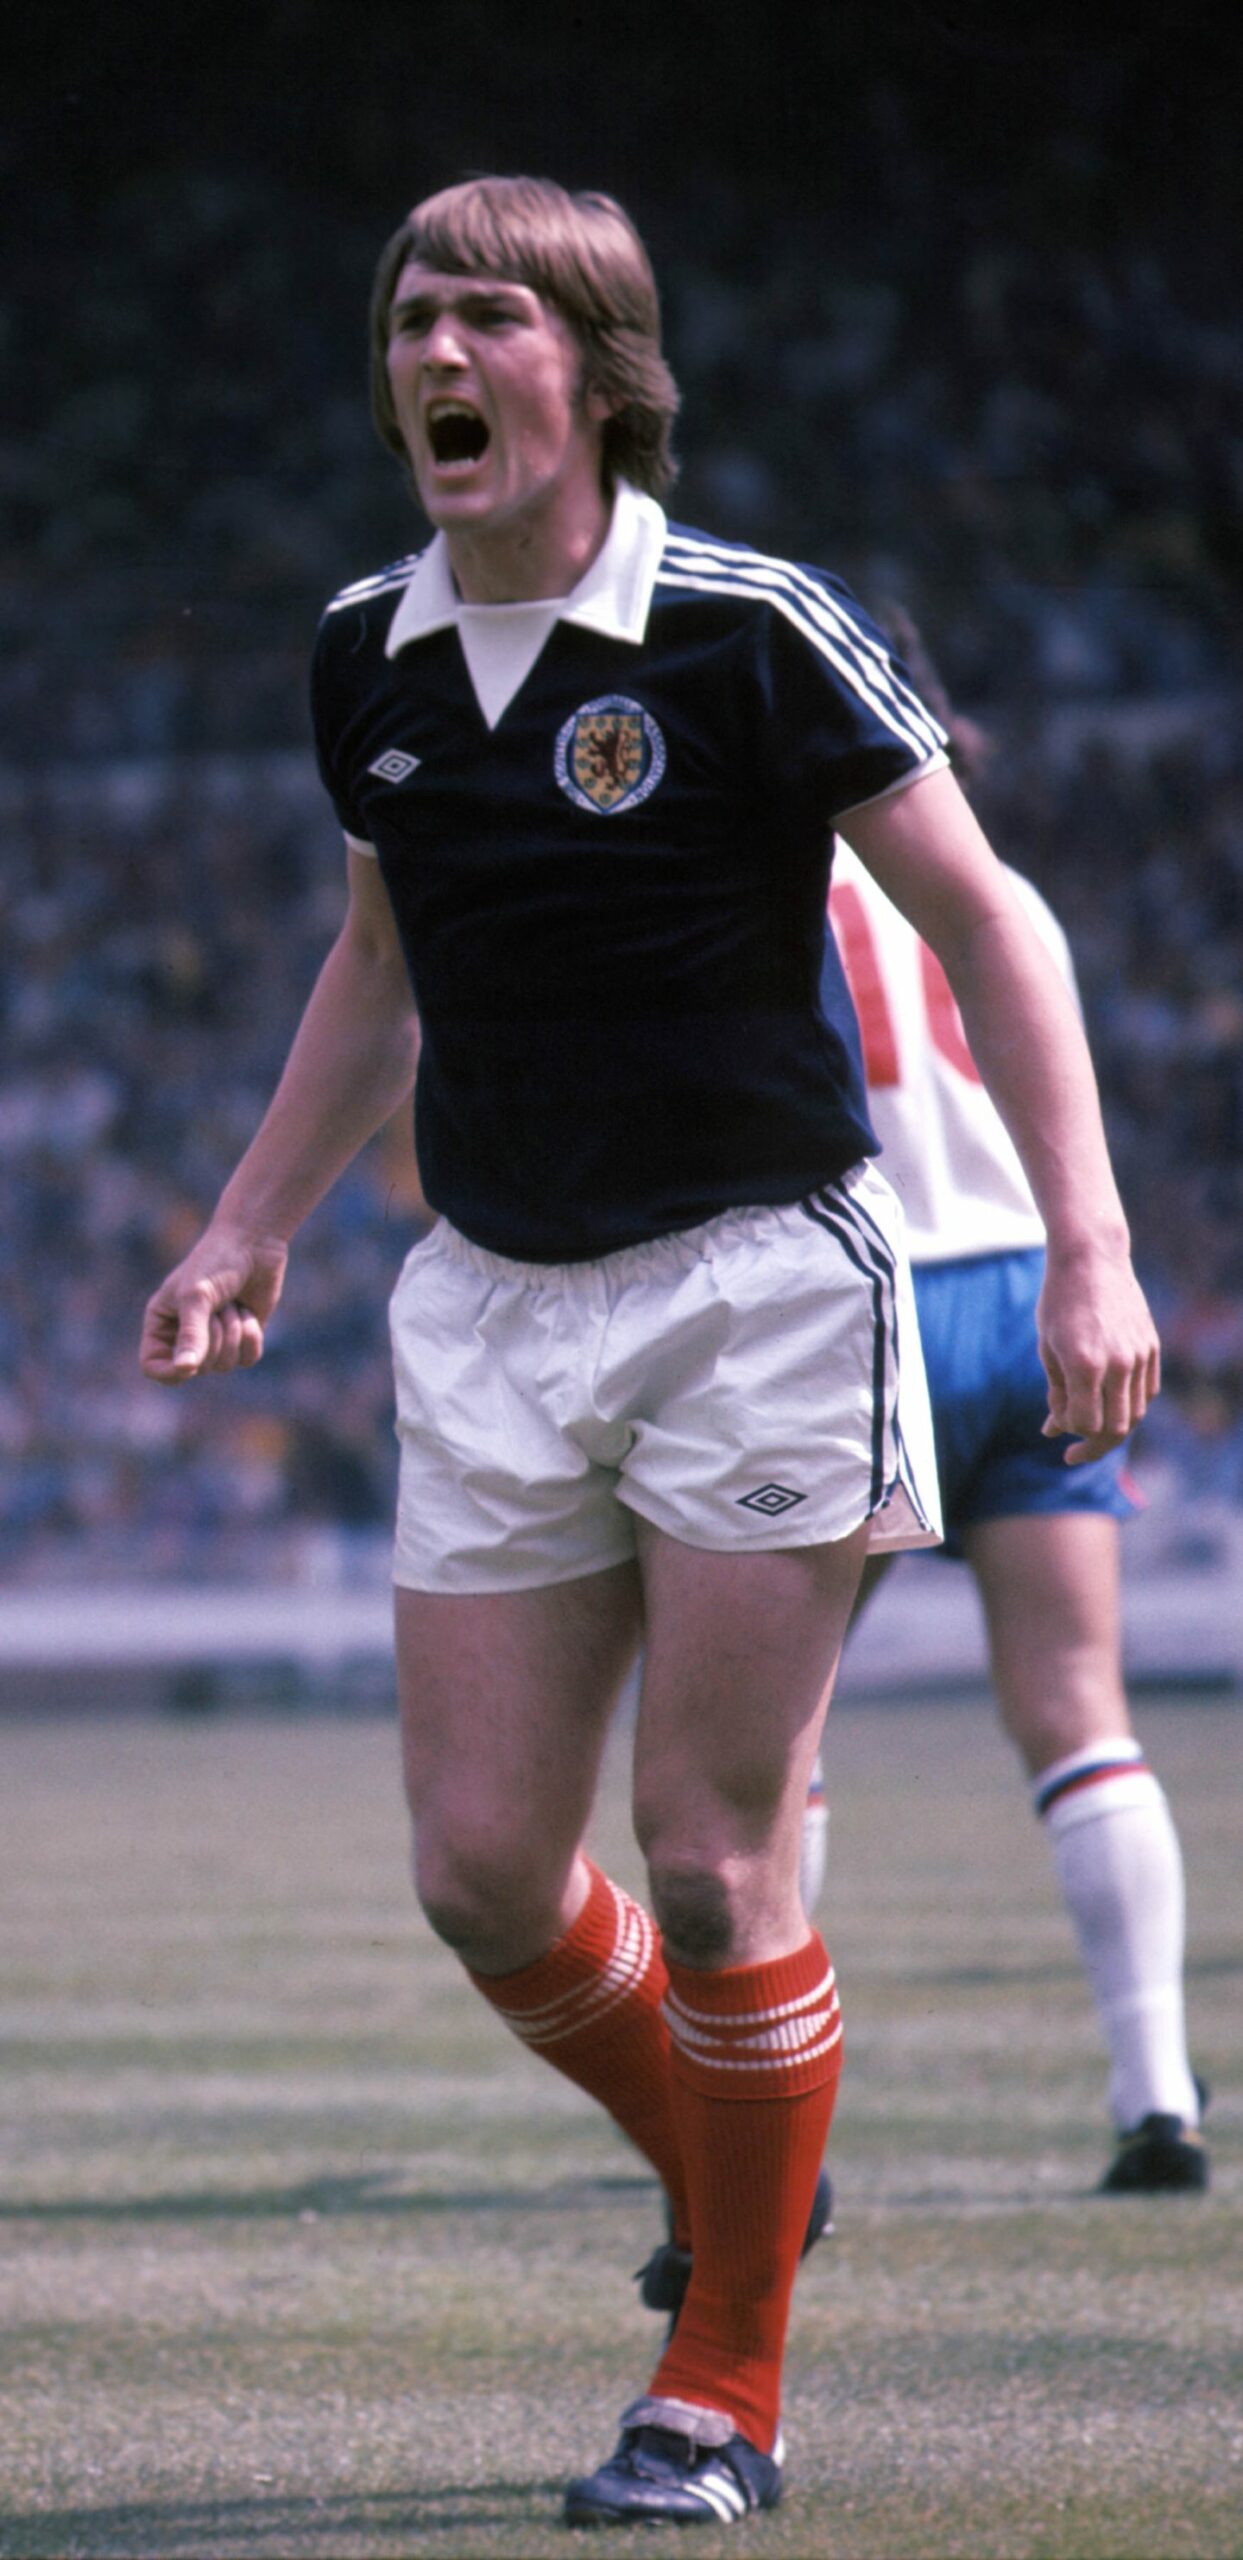 Kenny Dalglish in action for Scotland at Wembley.